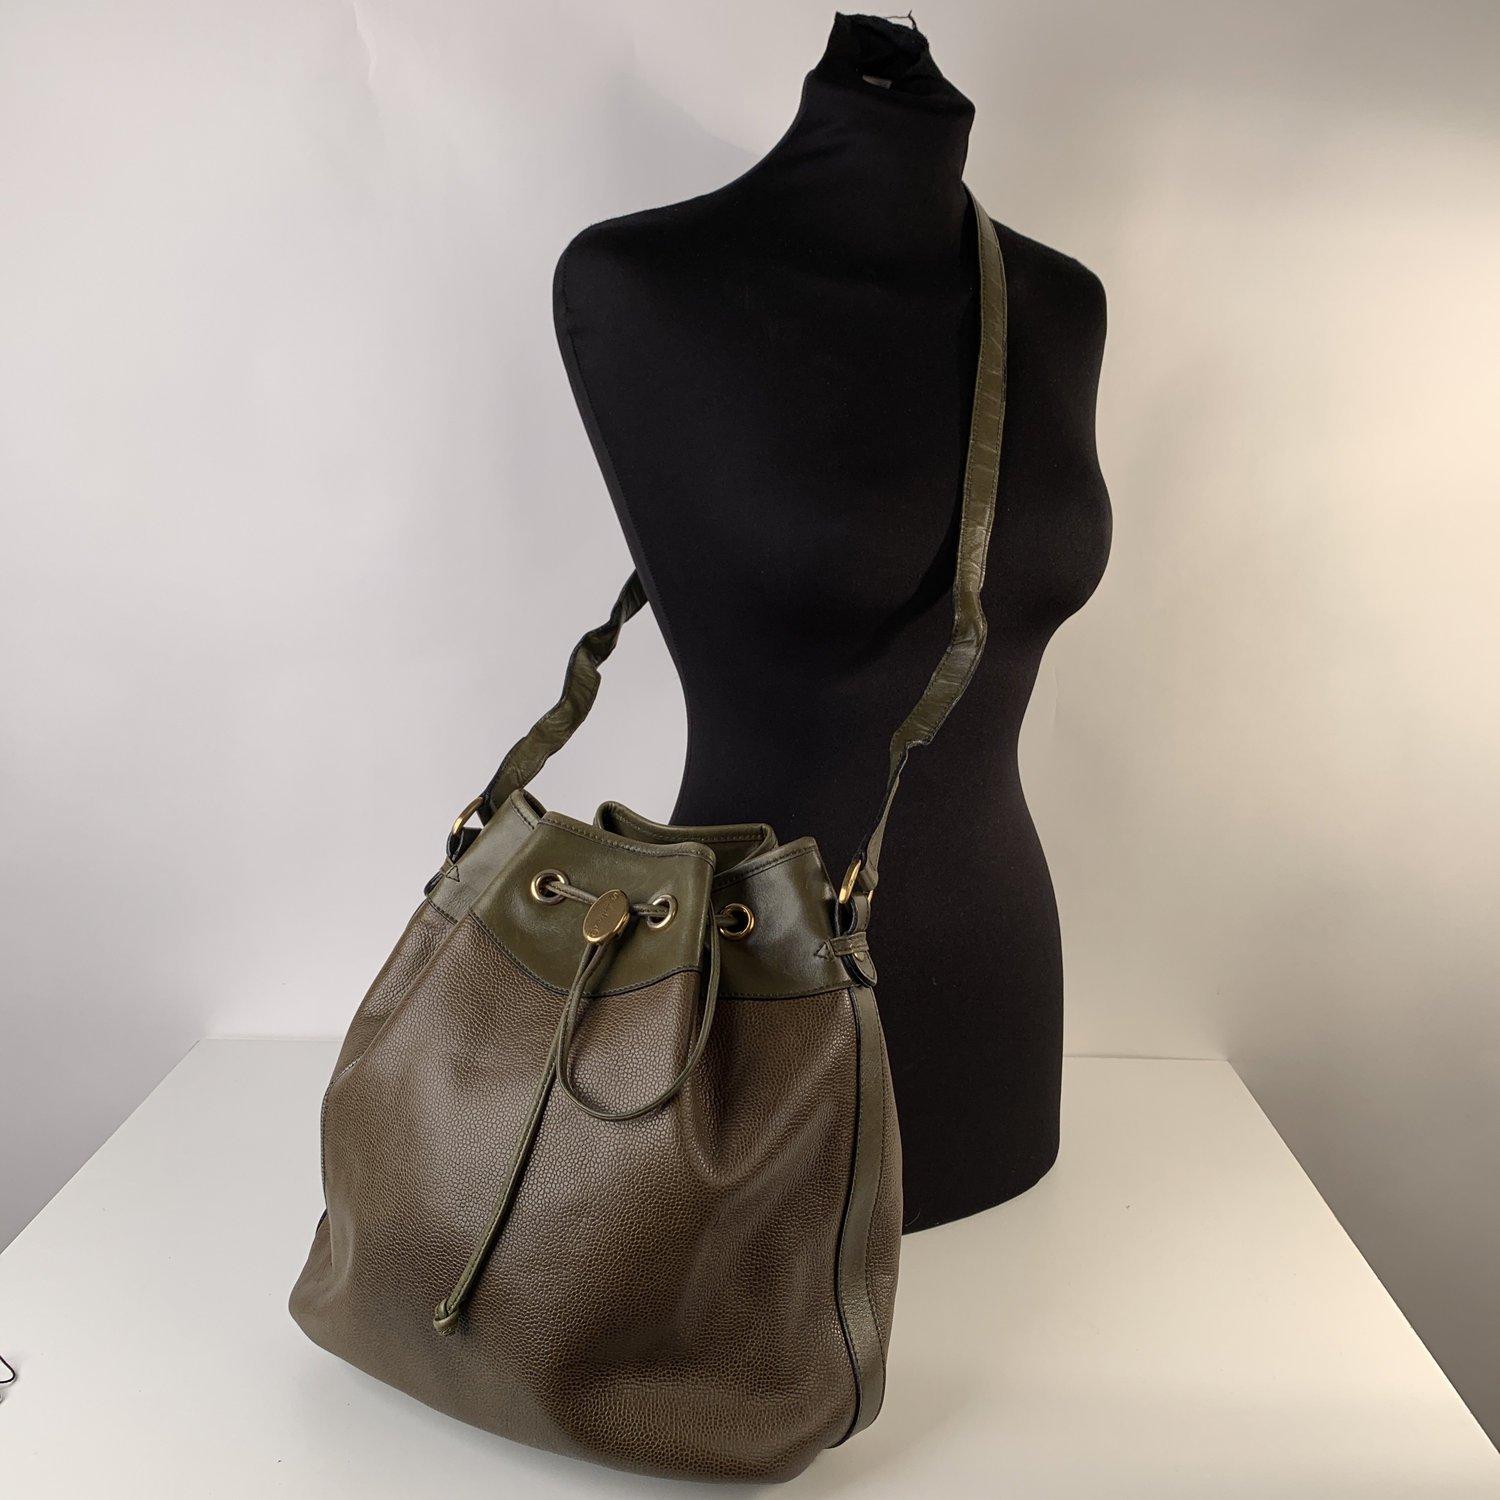 MATERIAL: Leather COLOR: Green MODEL: Bucker Bag GENDER: Women SIZE: Medium Condition B :GOOD CONDITION - Some light wear of use - some scratches on leather, some small dark stains on leather due to normal use, some wear of use on the internal